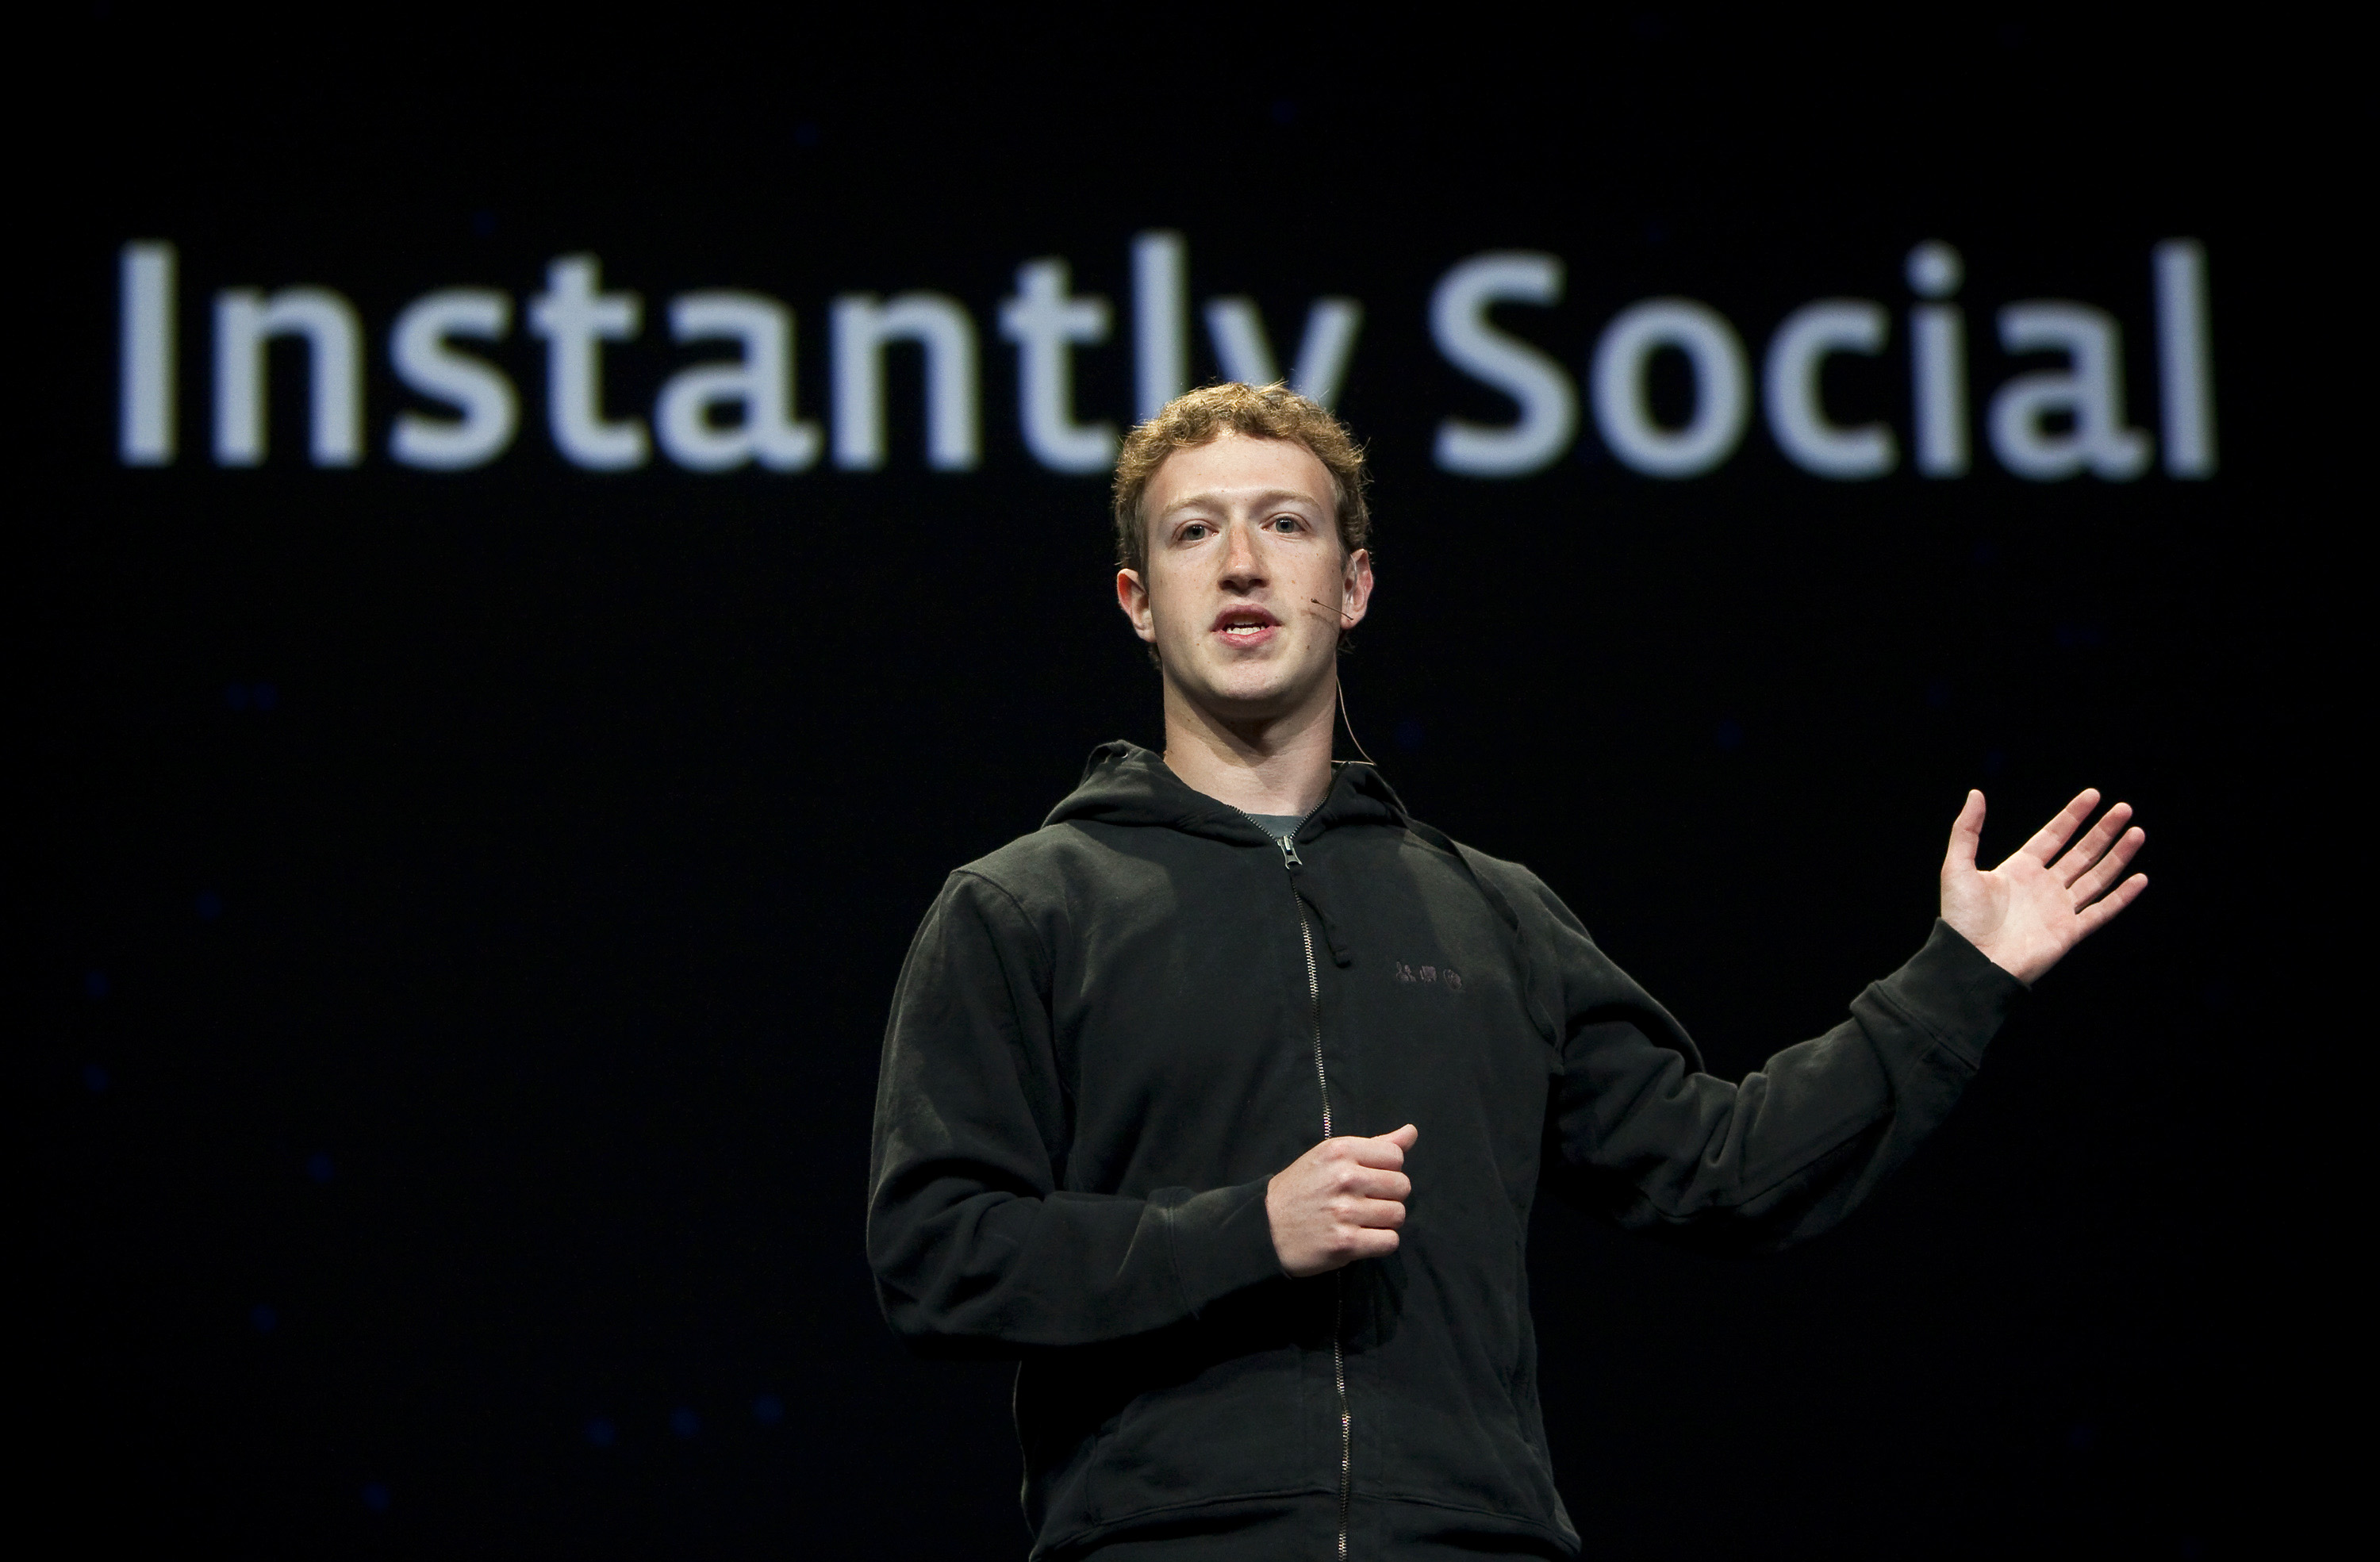 Mark Zuckerberg, chief executive officer and founder of Facebook, gives a keynote address at the F8 developer conference in San Francisco on April 21, 2010.
